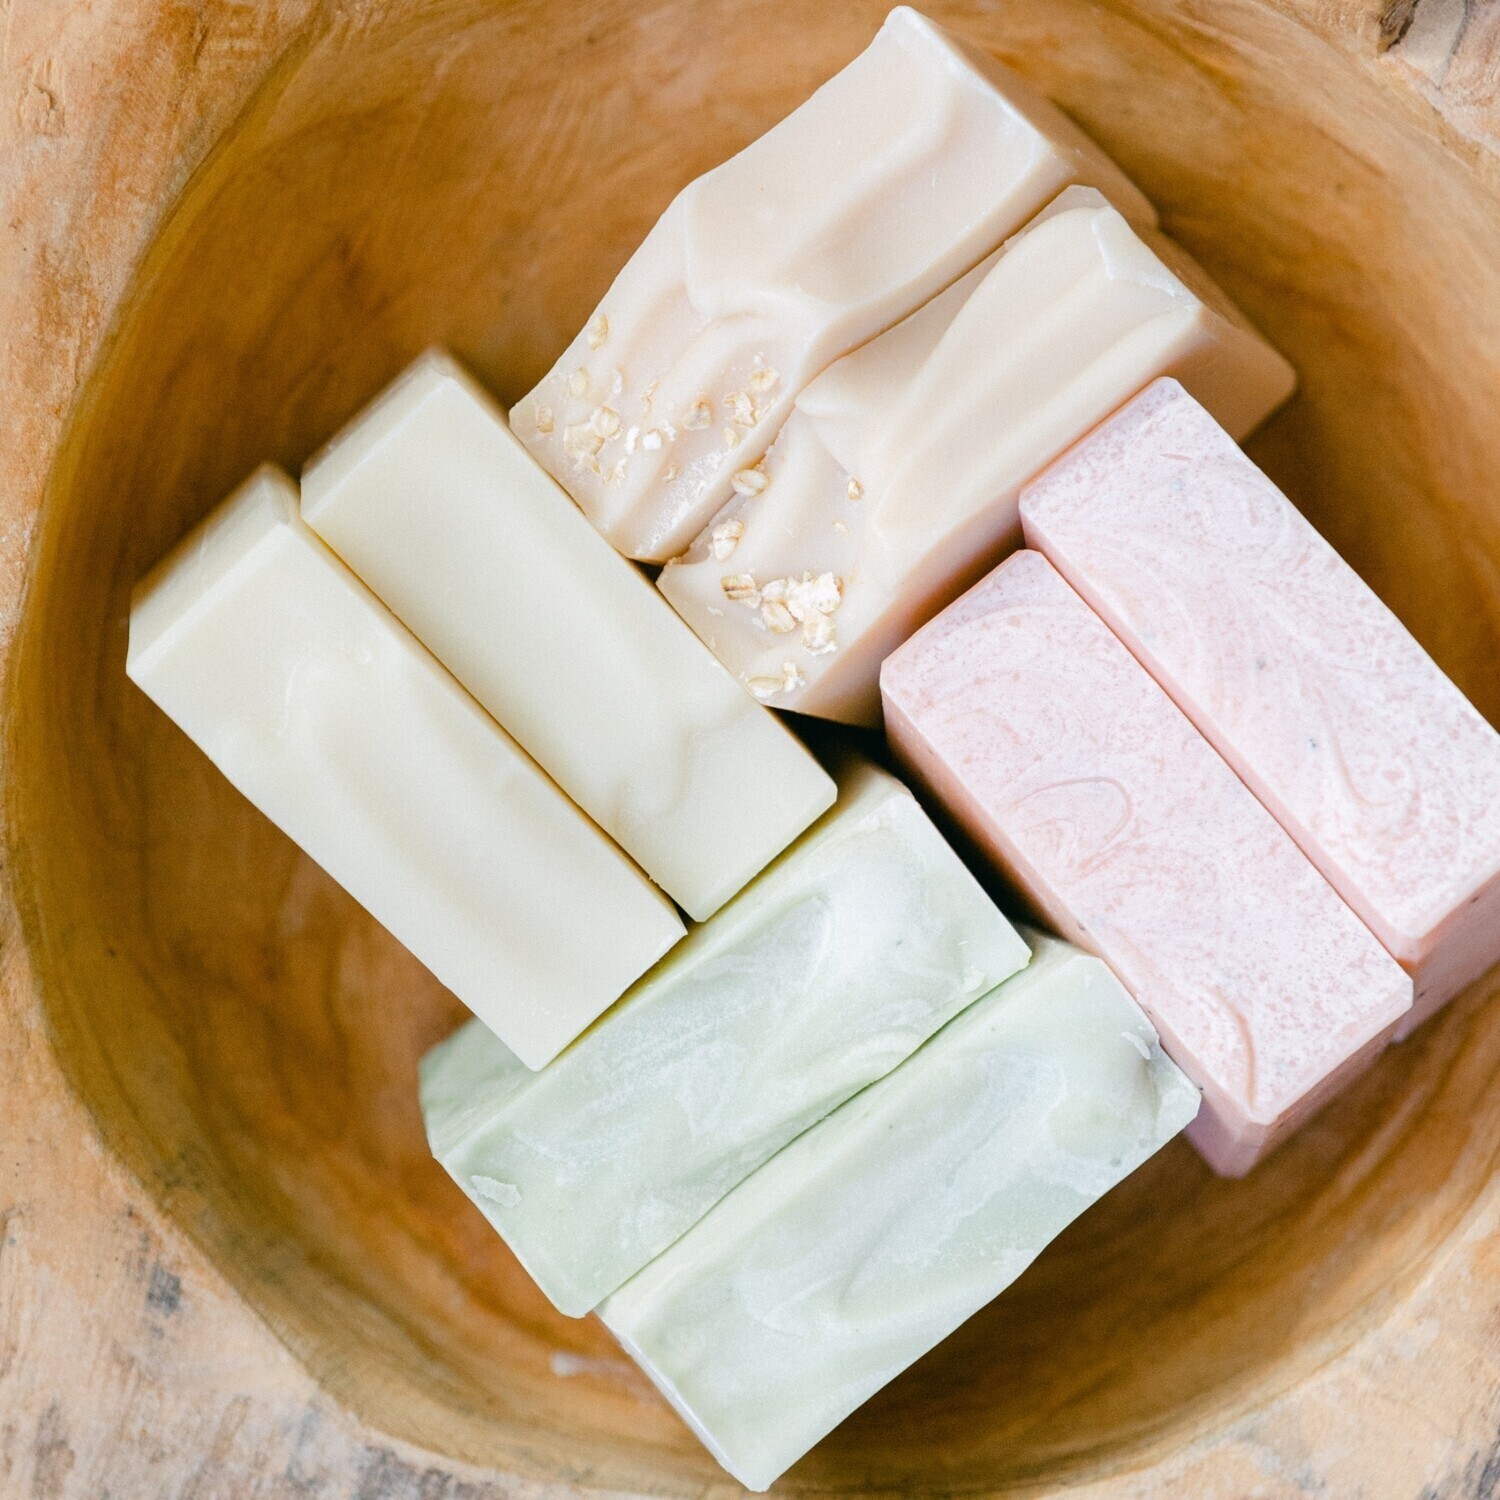 Fundraising Soaps (Carden Family Mission Trip)